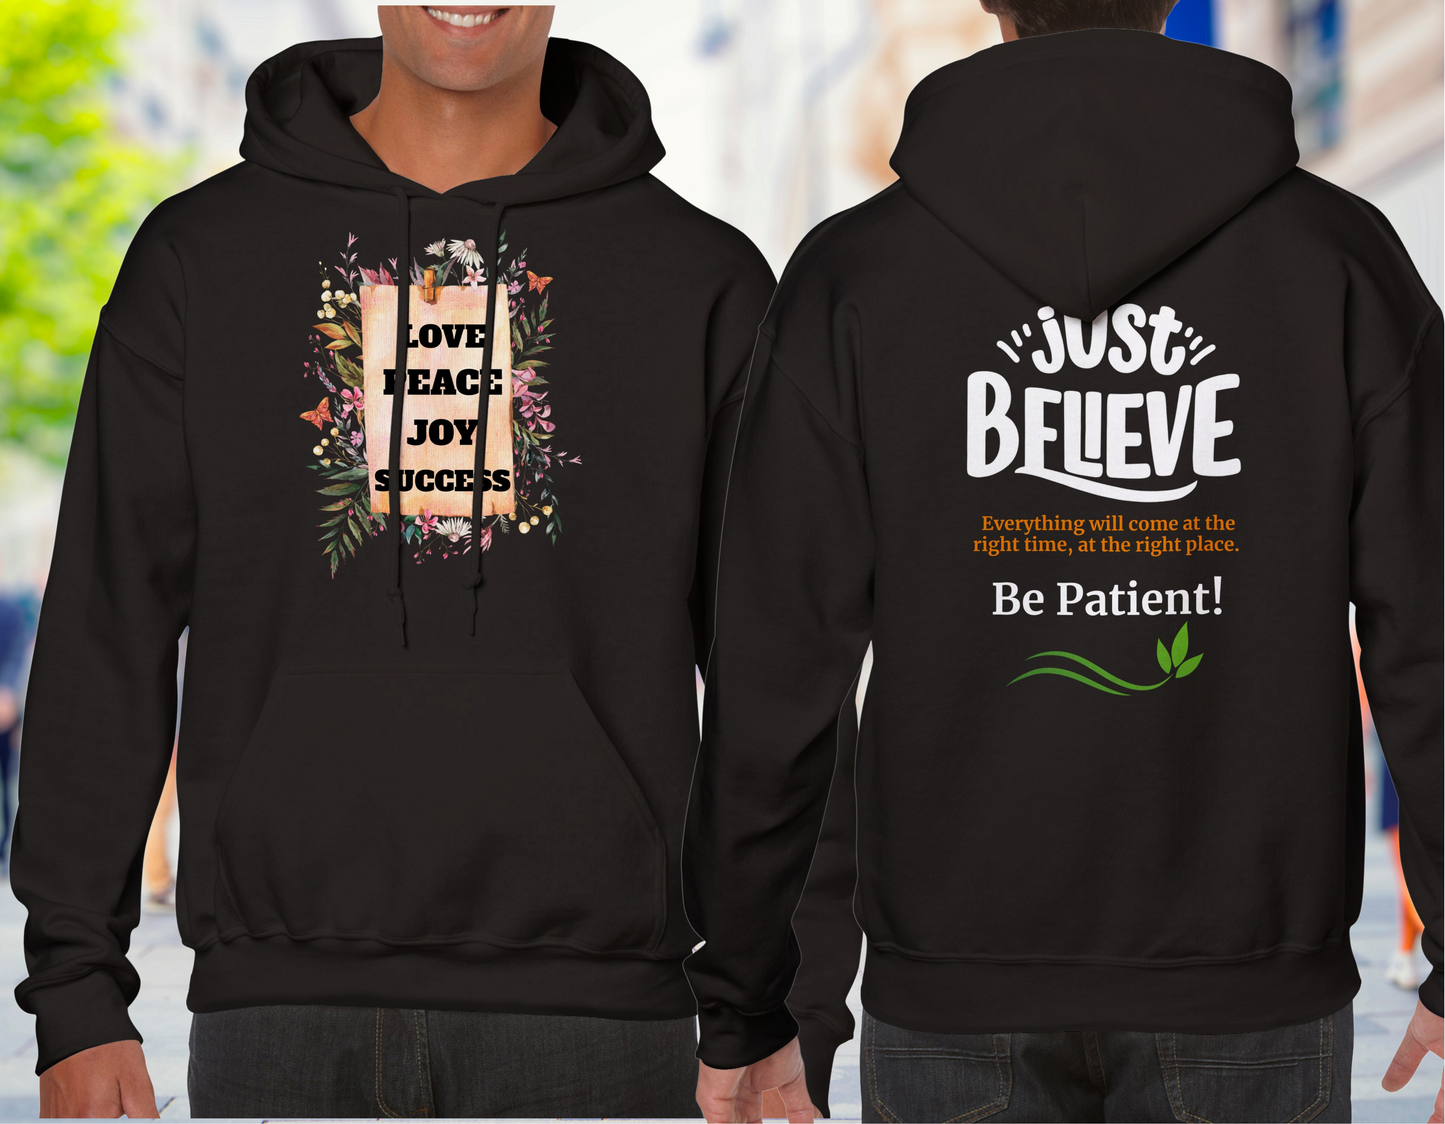 Cottagecore Unisex Hoddie, with positive Words: Love, Peace, Joy and Success. In the back: Just Believe everything will come at the right time and the right place. Be patient!Positive Quote Top, Vintage Jumper Gift Idea - black hoodie